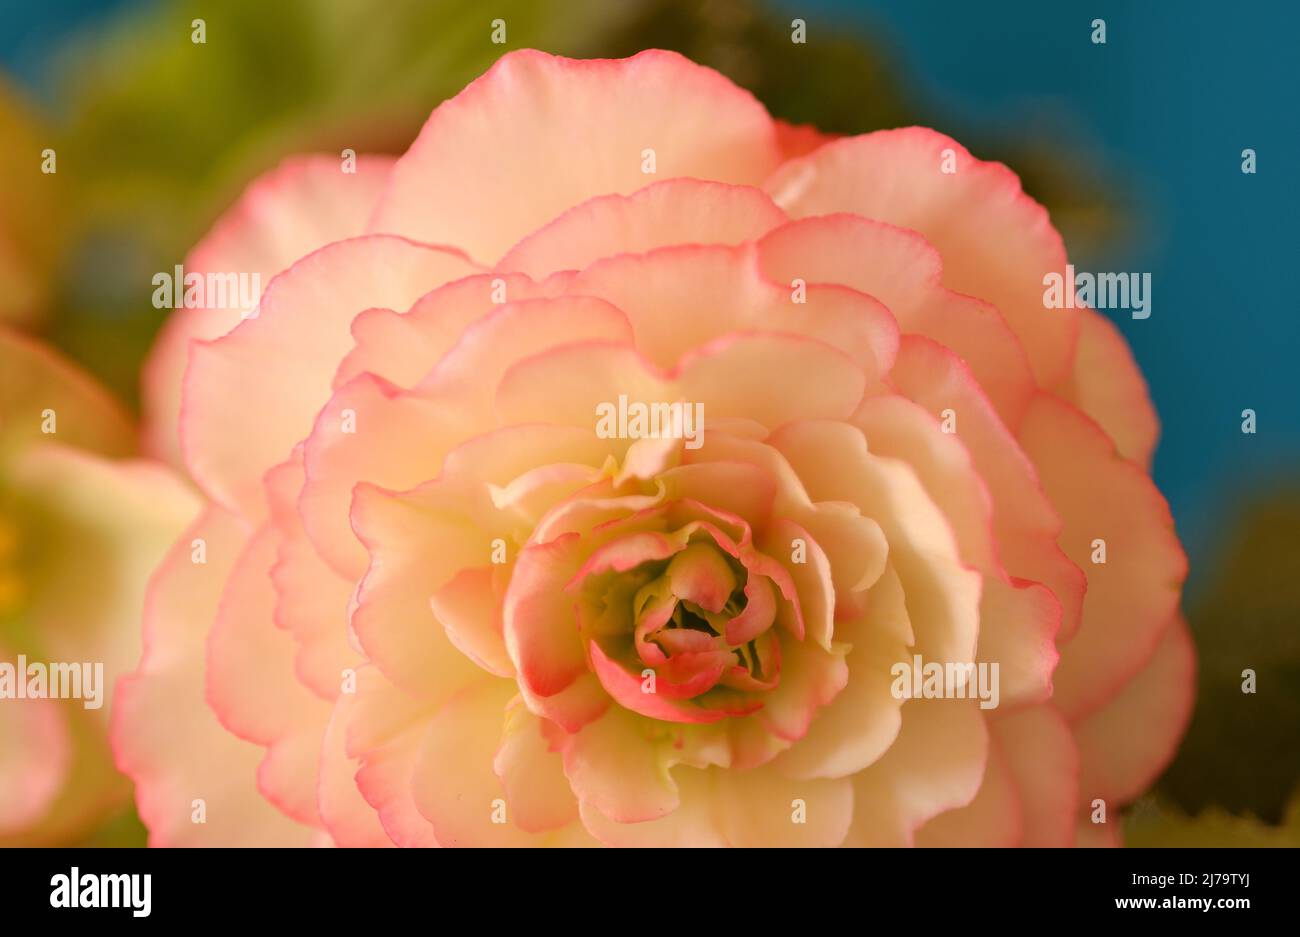 Pink and white Rose Picotee Begonia with yellow center on blue and green background Stock Photo